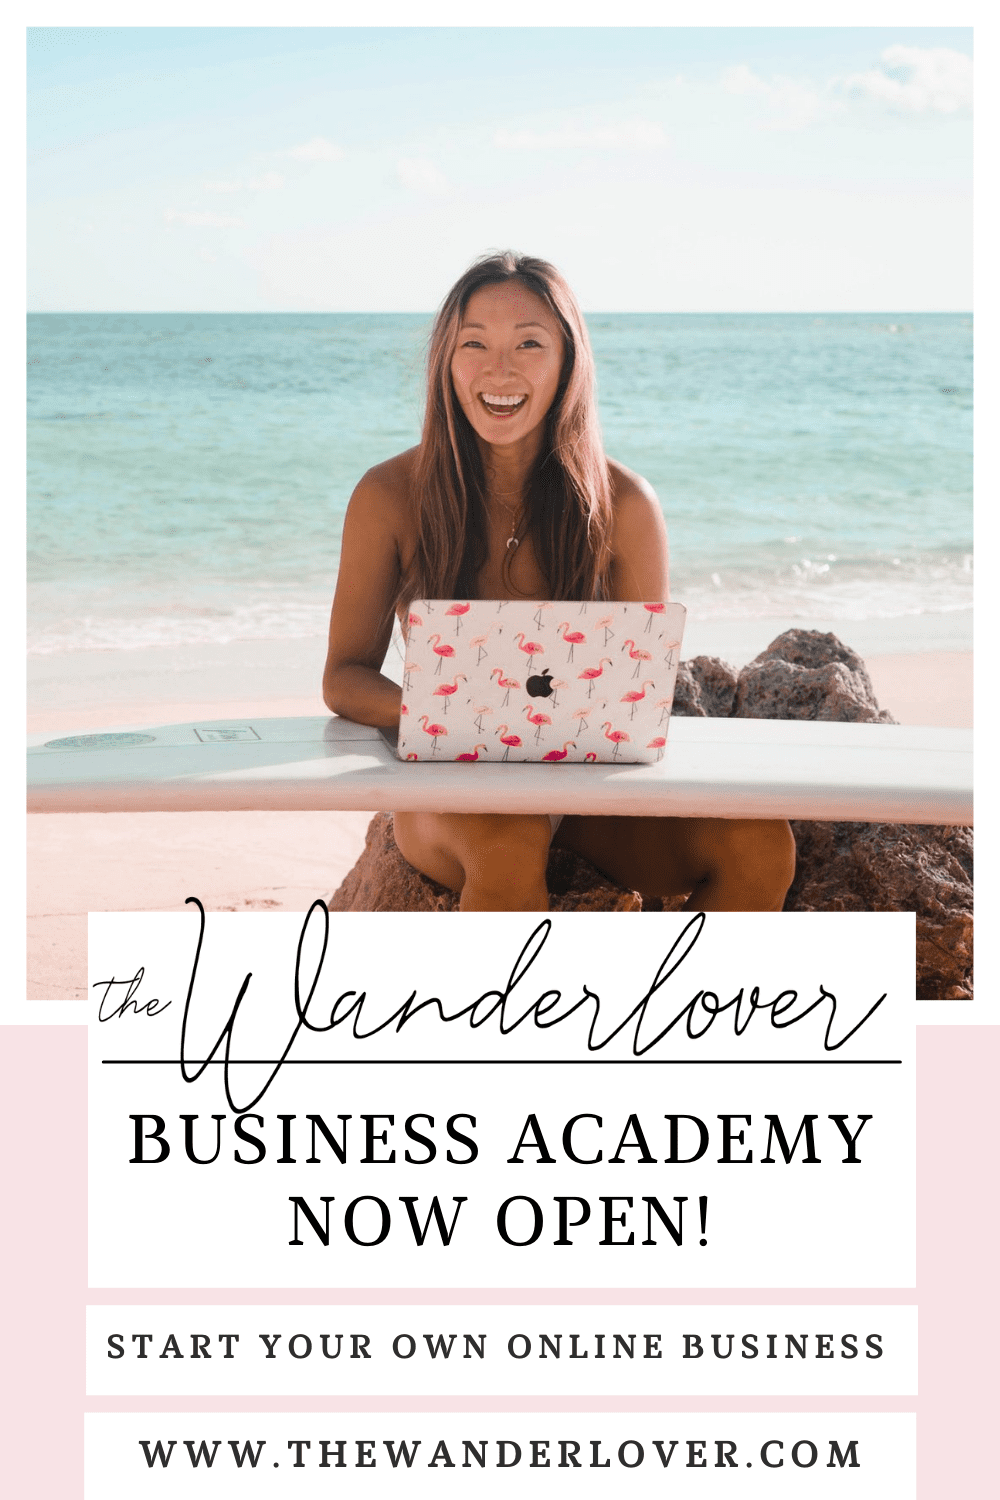 Business Academy 2.0 Now Open!